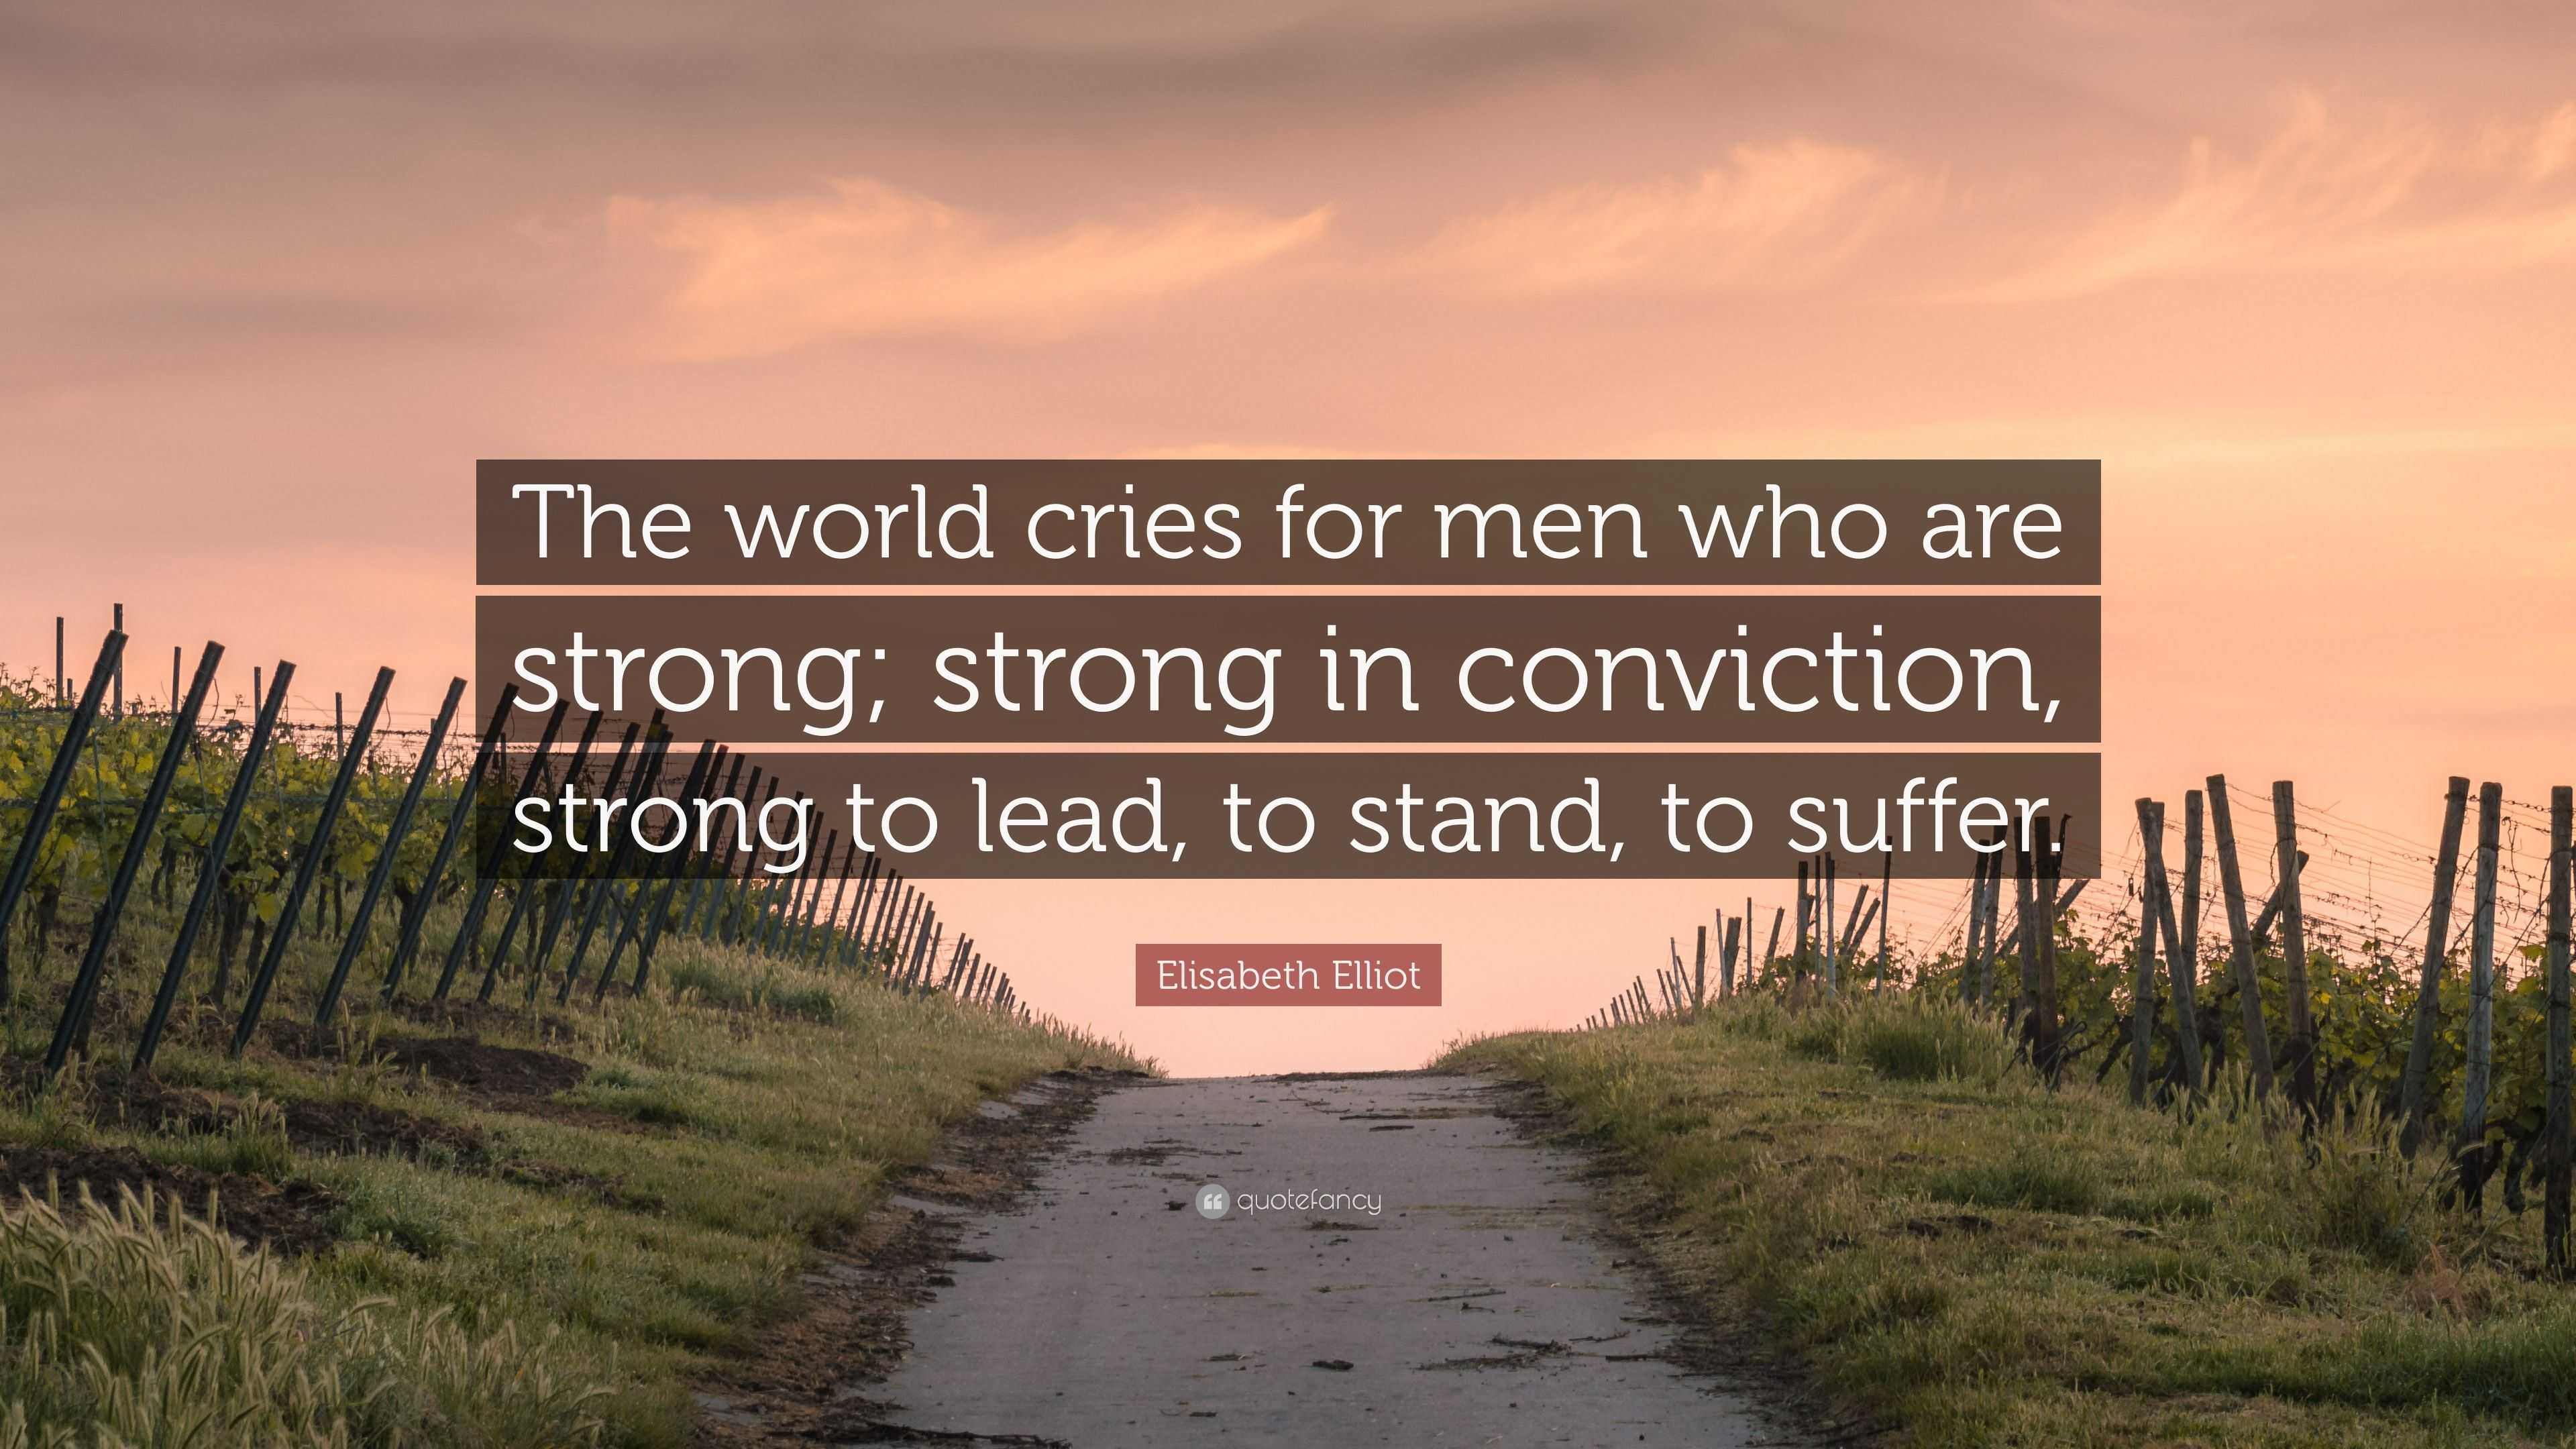 Elisabeth Elliot Quote: “The world cries for men who are strong; strong ...